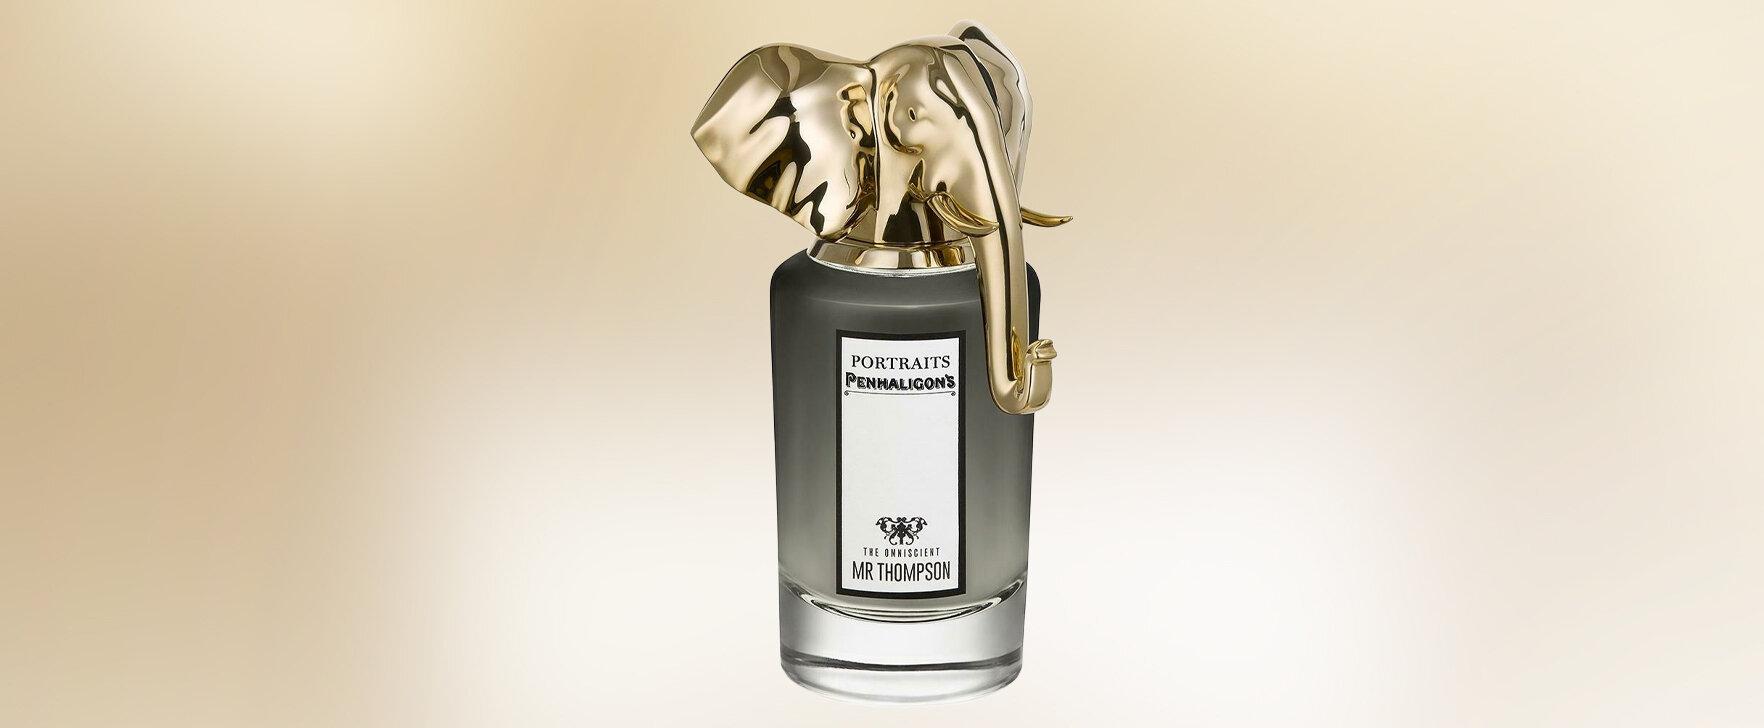 Mysterious and Elegant: The New Masculine Fragrance "Portraits - The Omniscient Mister Thompson" by Penhaligon's